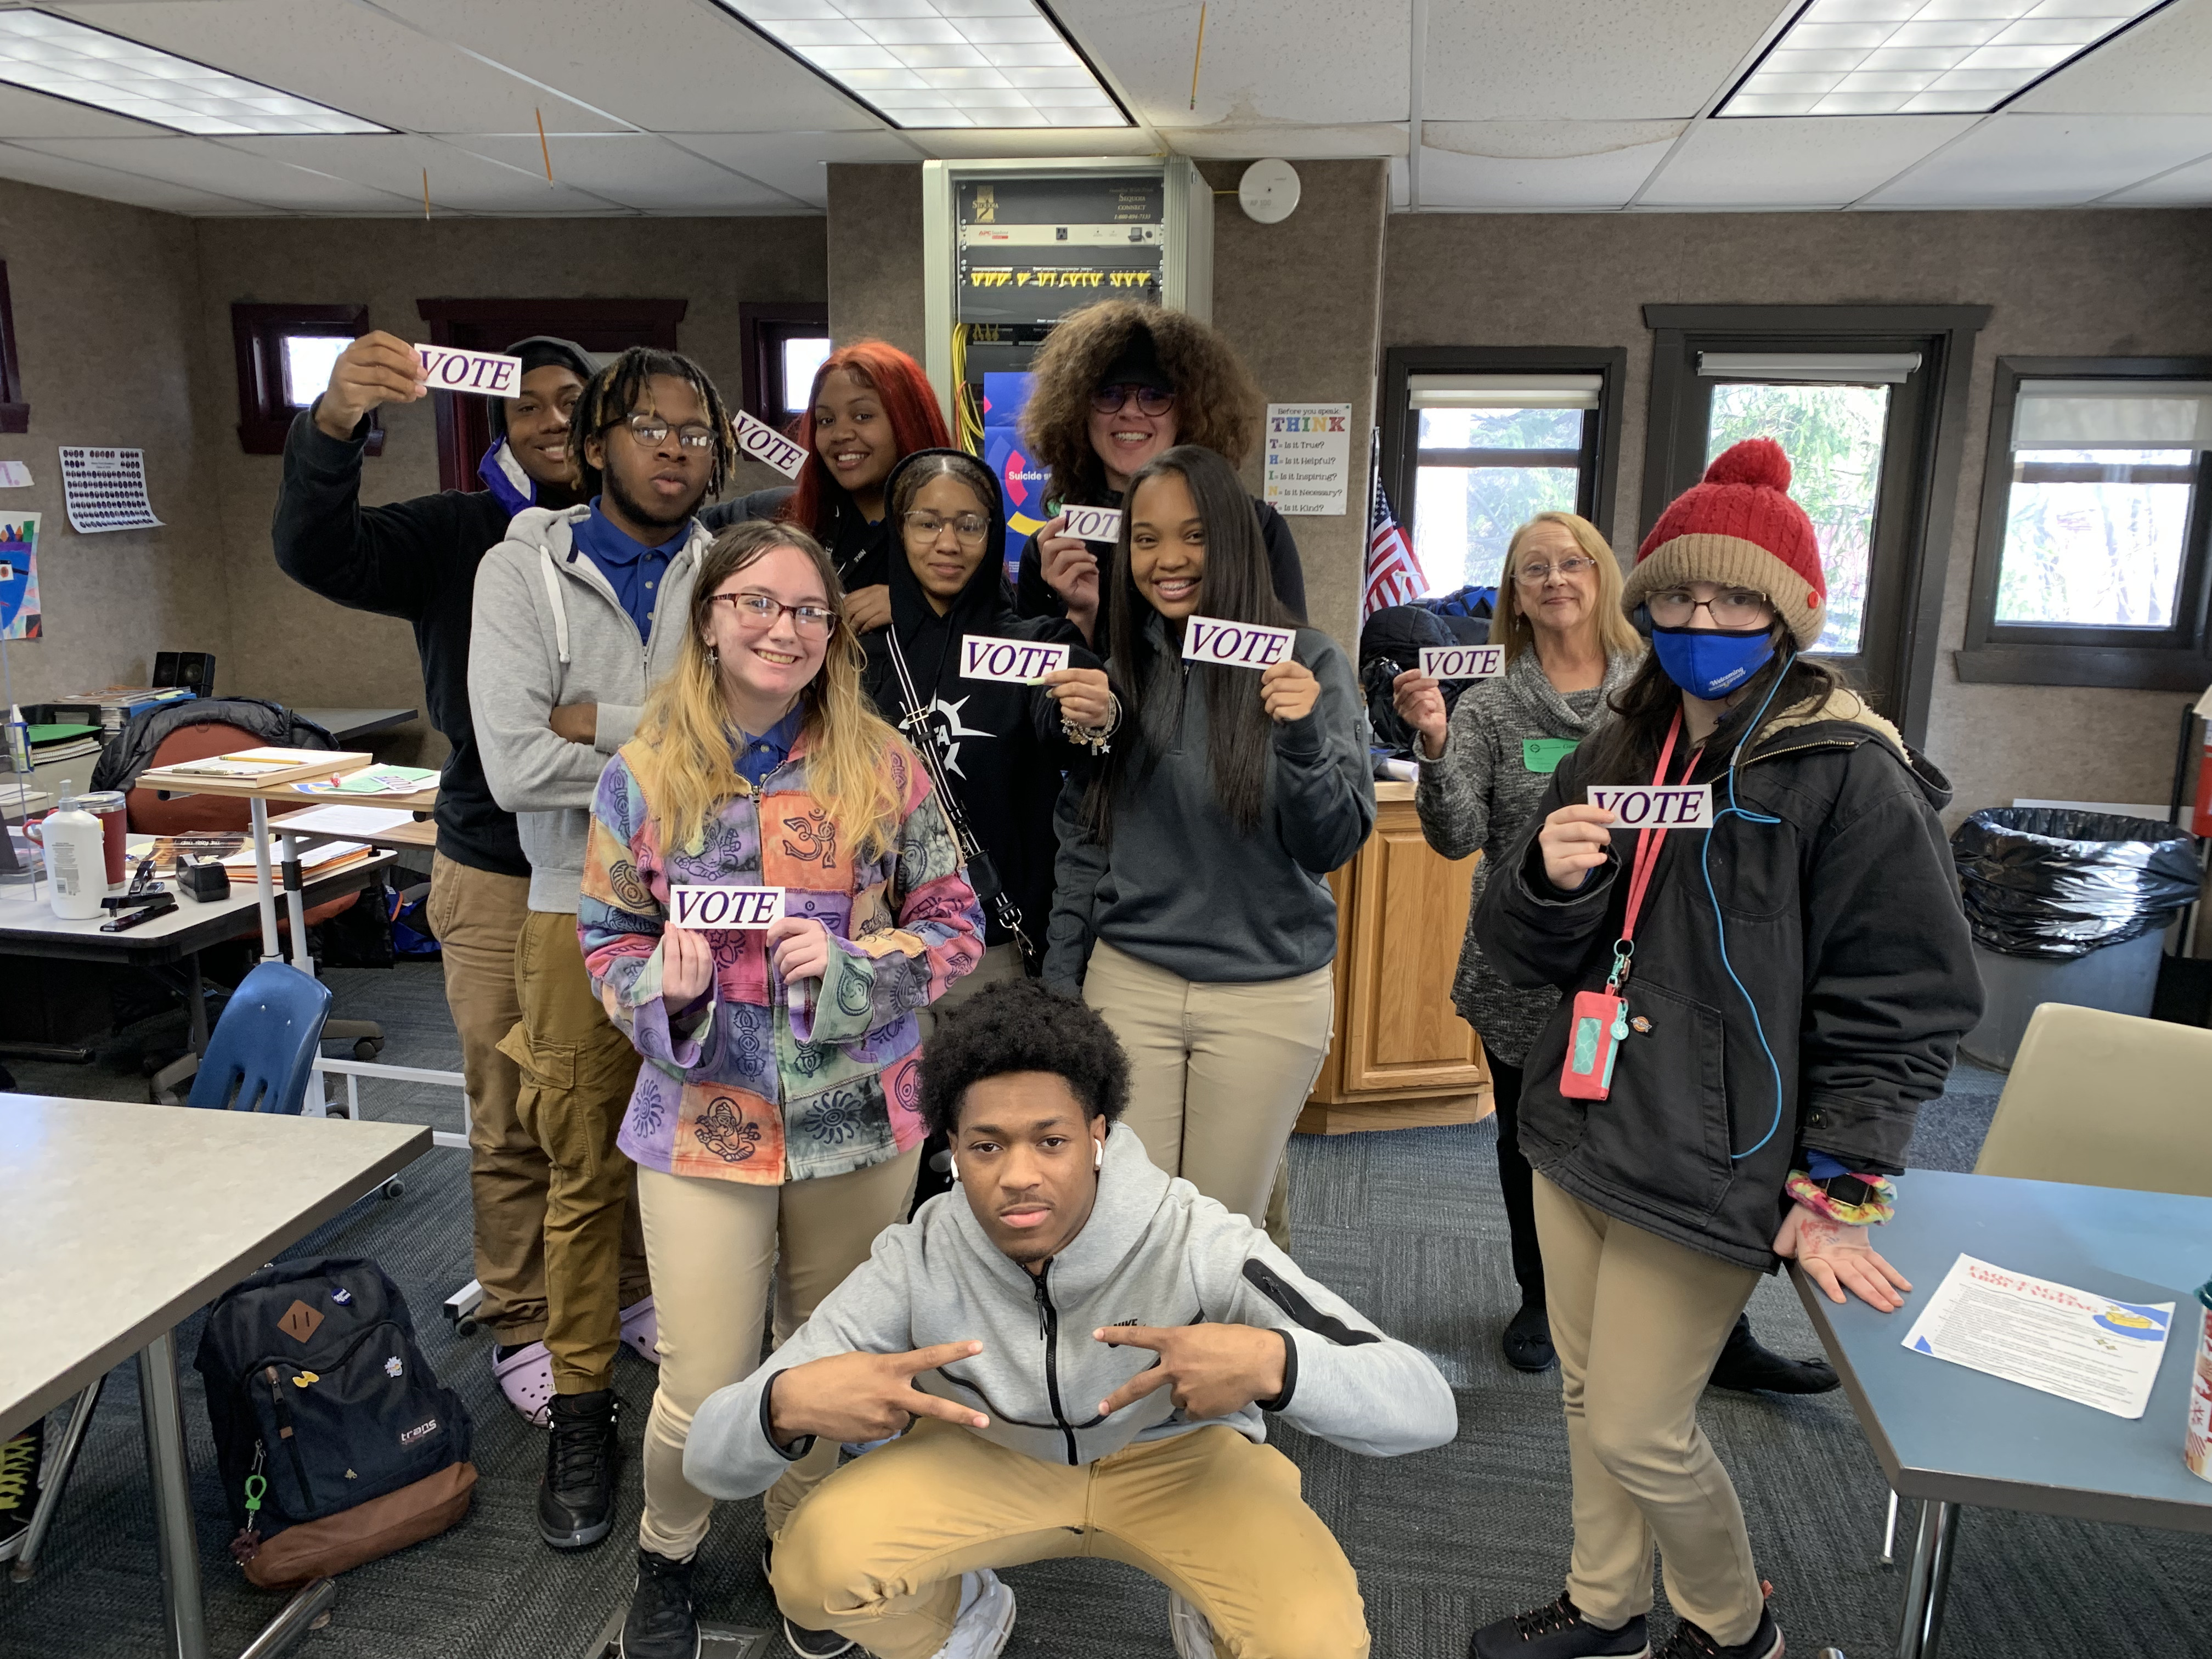 Mrs. Cunningham's Life Skills Class was visited by the League of Women Voters. Representatives came to HFA and helped students register to vote.